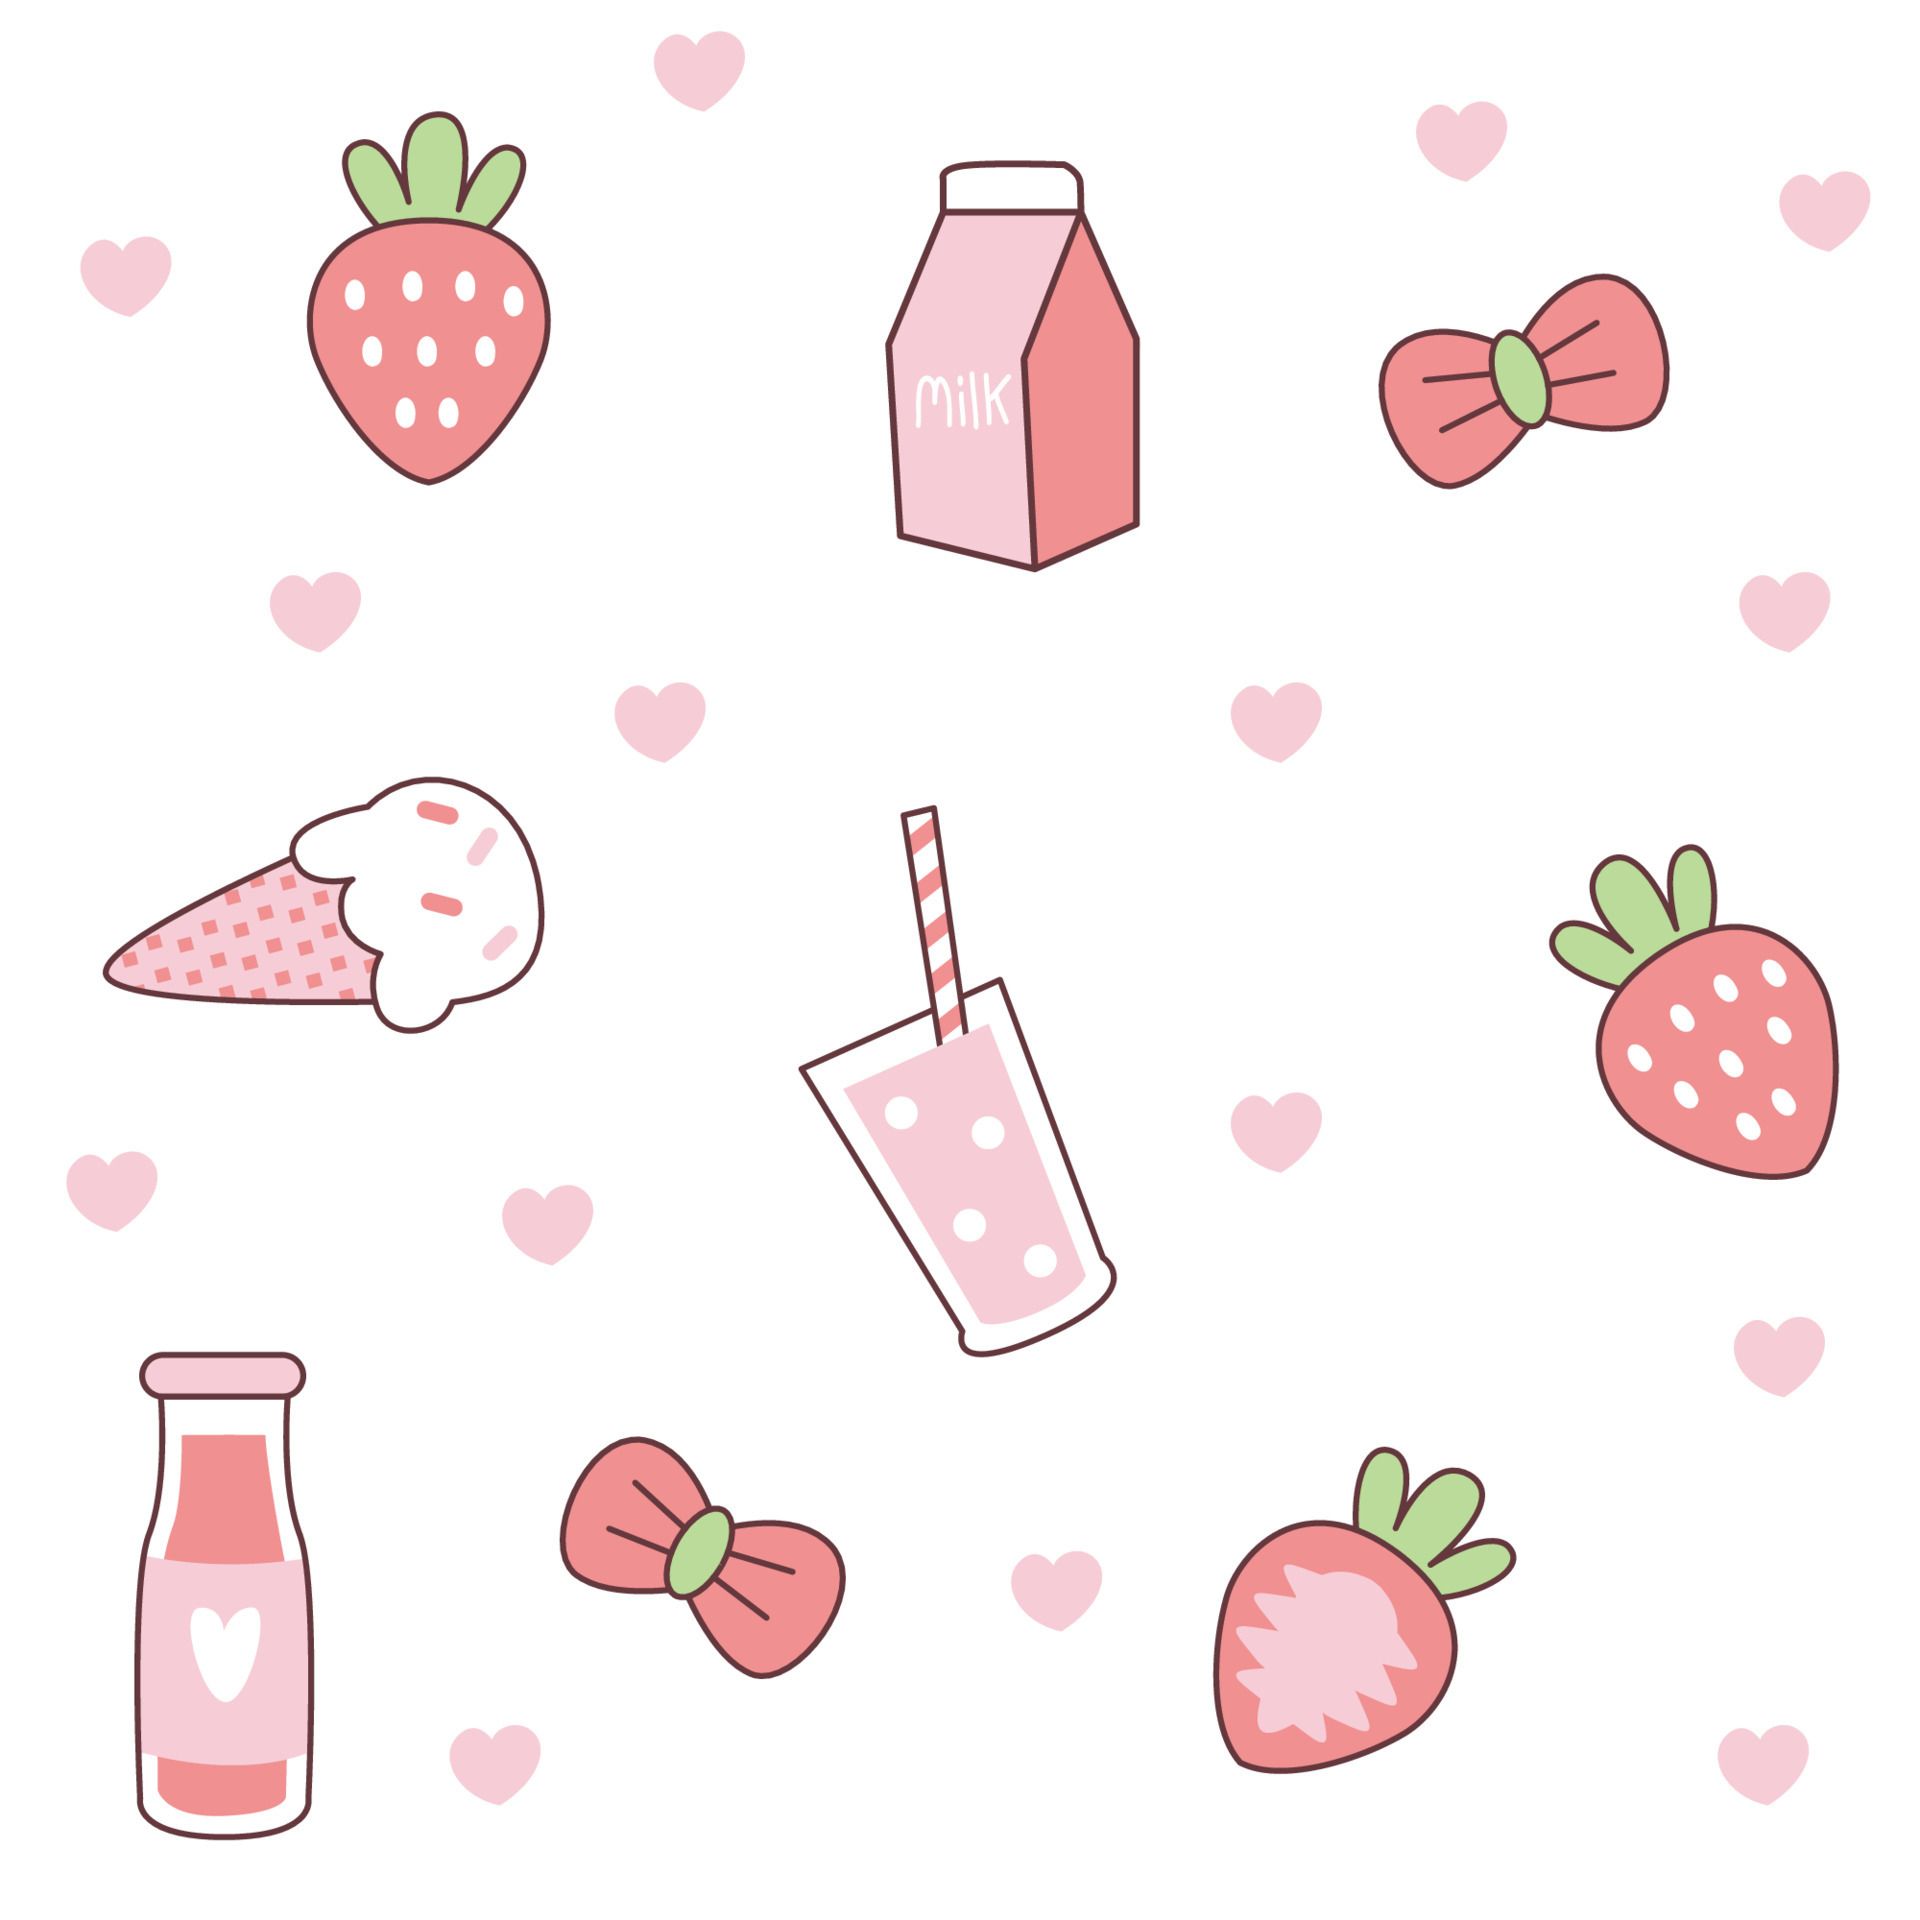 strawberry, milk, ice cream, ribbon cartoons pattern design. white background. The seamless cute pattern in a girl or baby fashion, Fresh colorful strawberry fruit in summer.Vector design for fashion. Vector Art